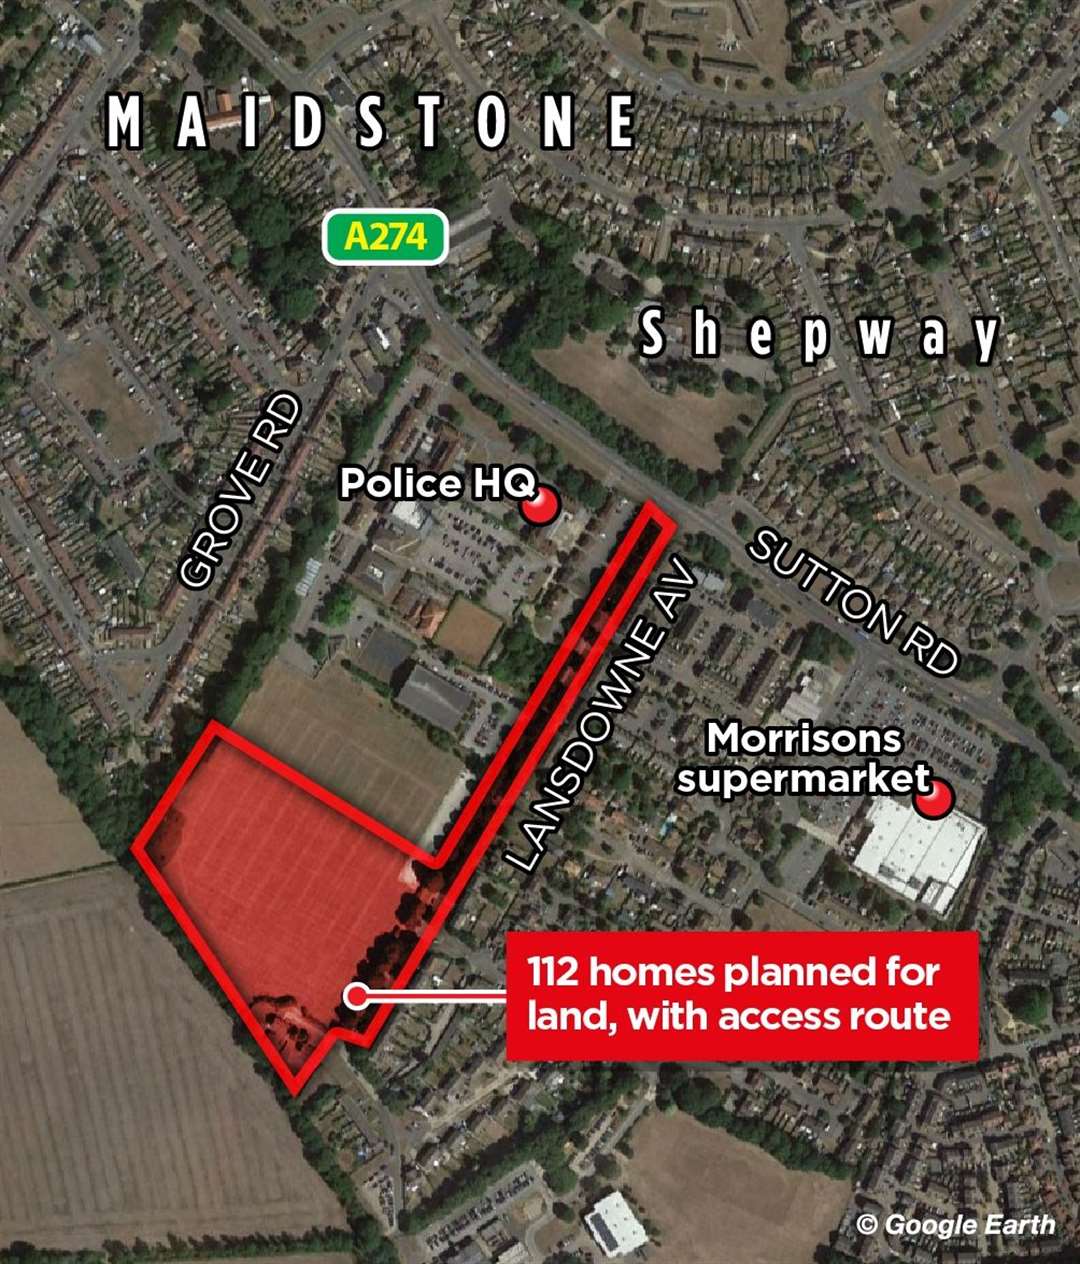 Unpopular plans for 112 homes in Maidstone have been rejected